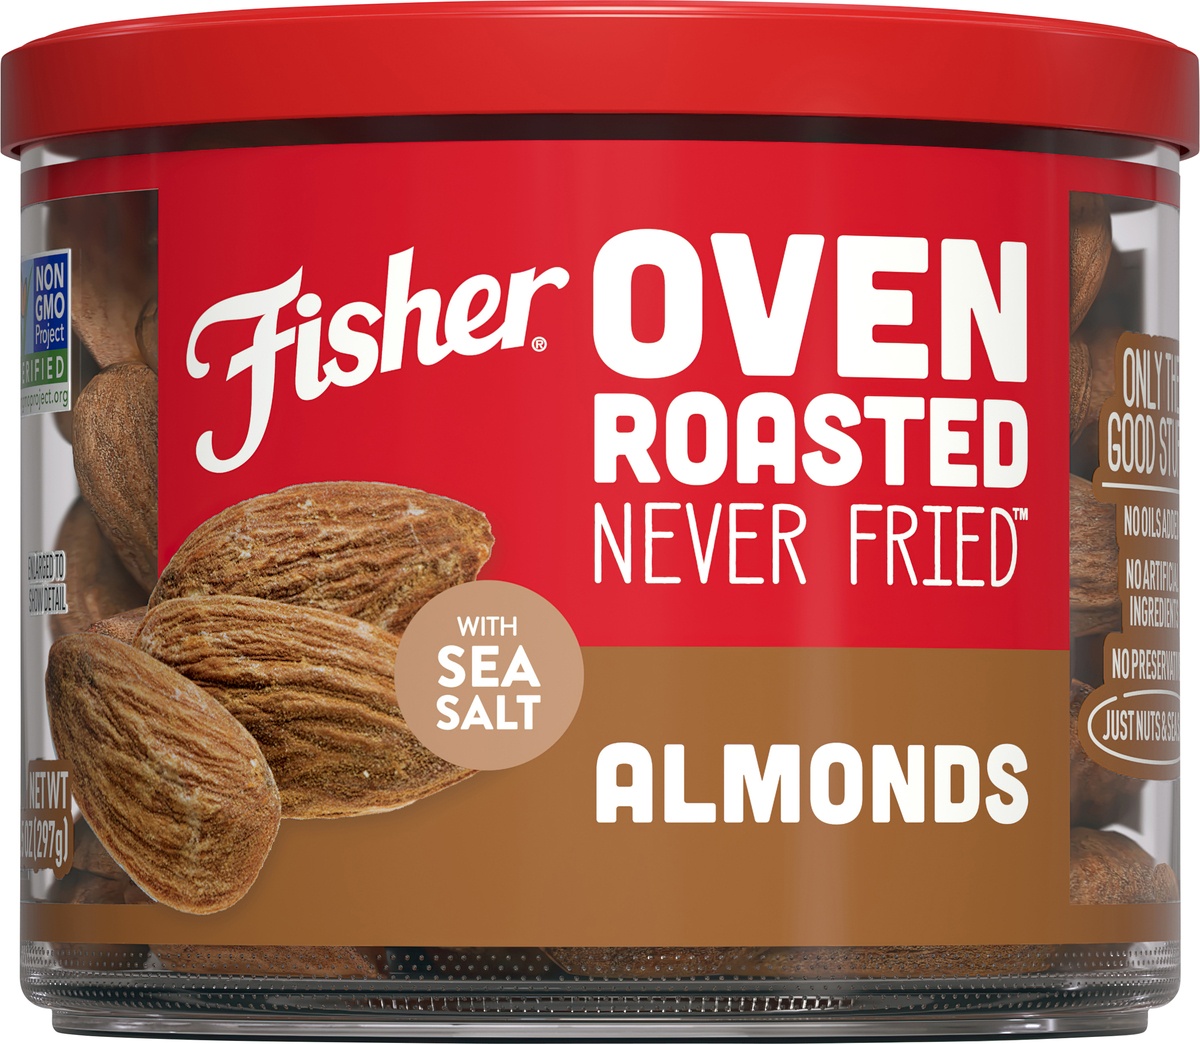 slide 9 of 10, Fisher Oven Roasted Never Fried Almonds With Sea Salt, 10.5 oz